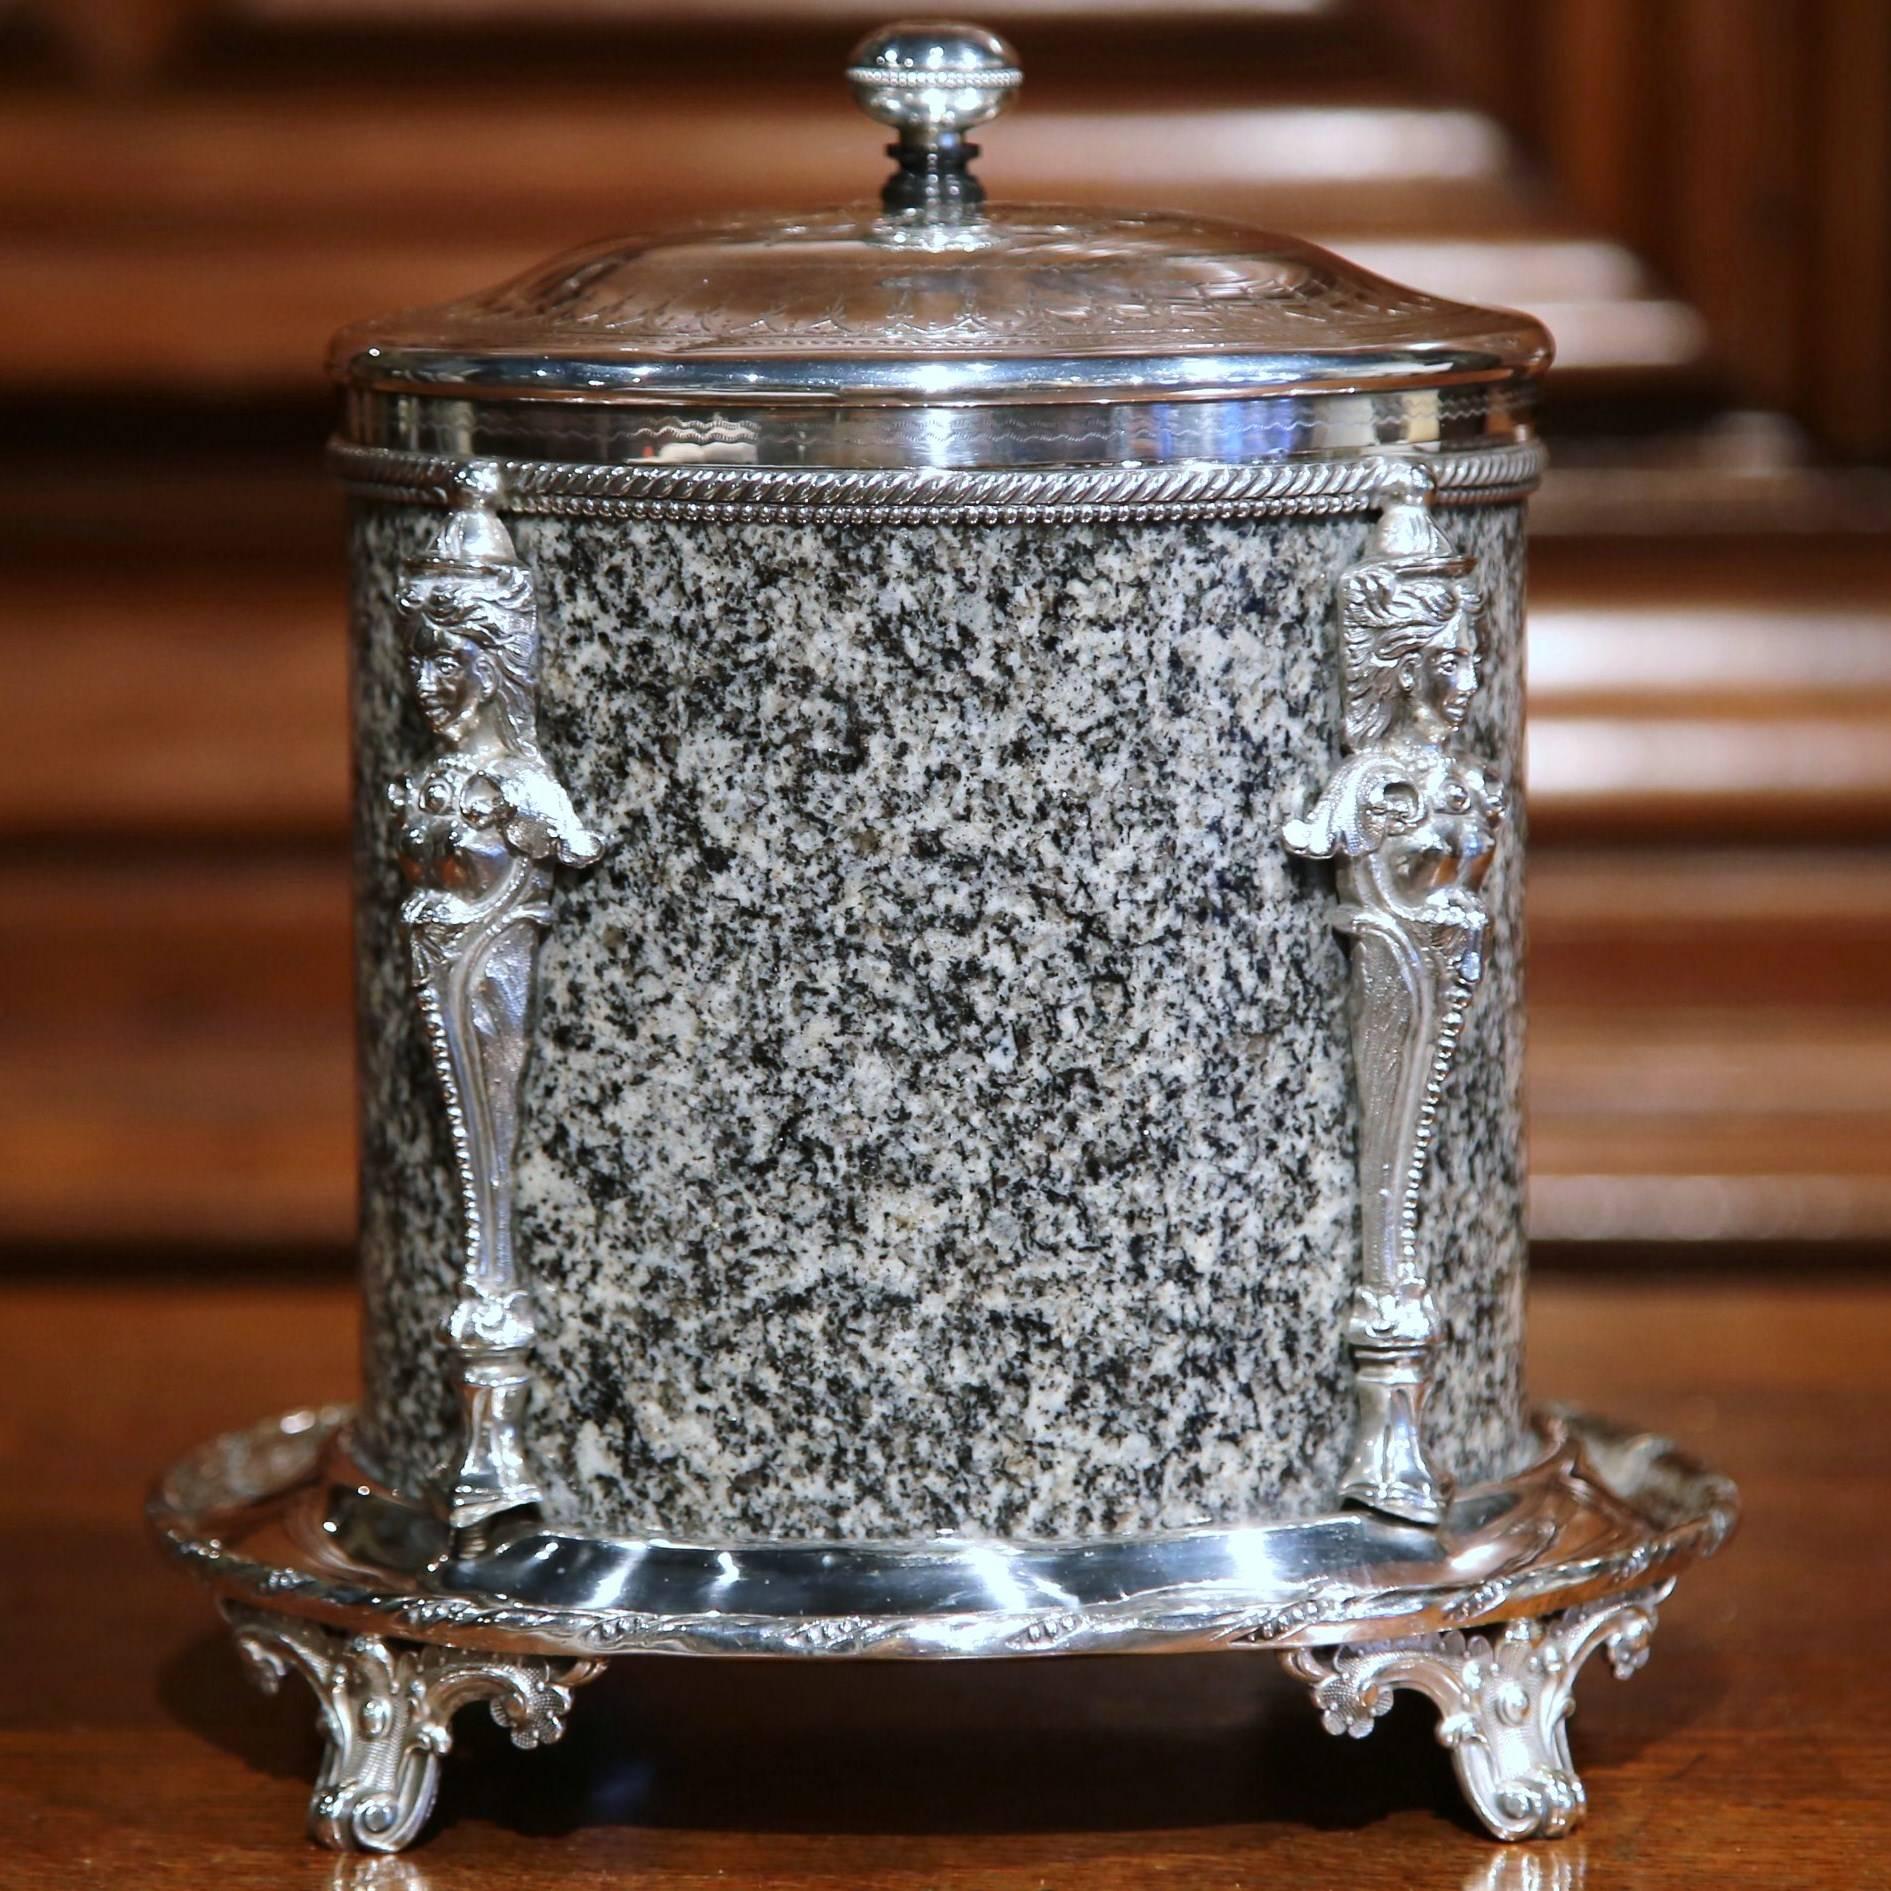 19th Century English Granite and Silver Plated Biscuit Box with Decorative Mount 1